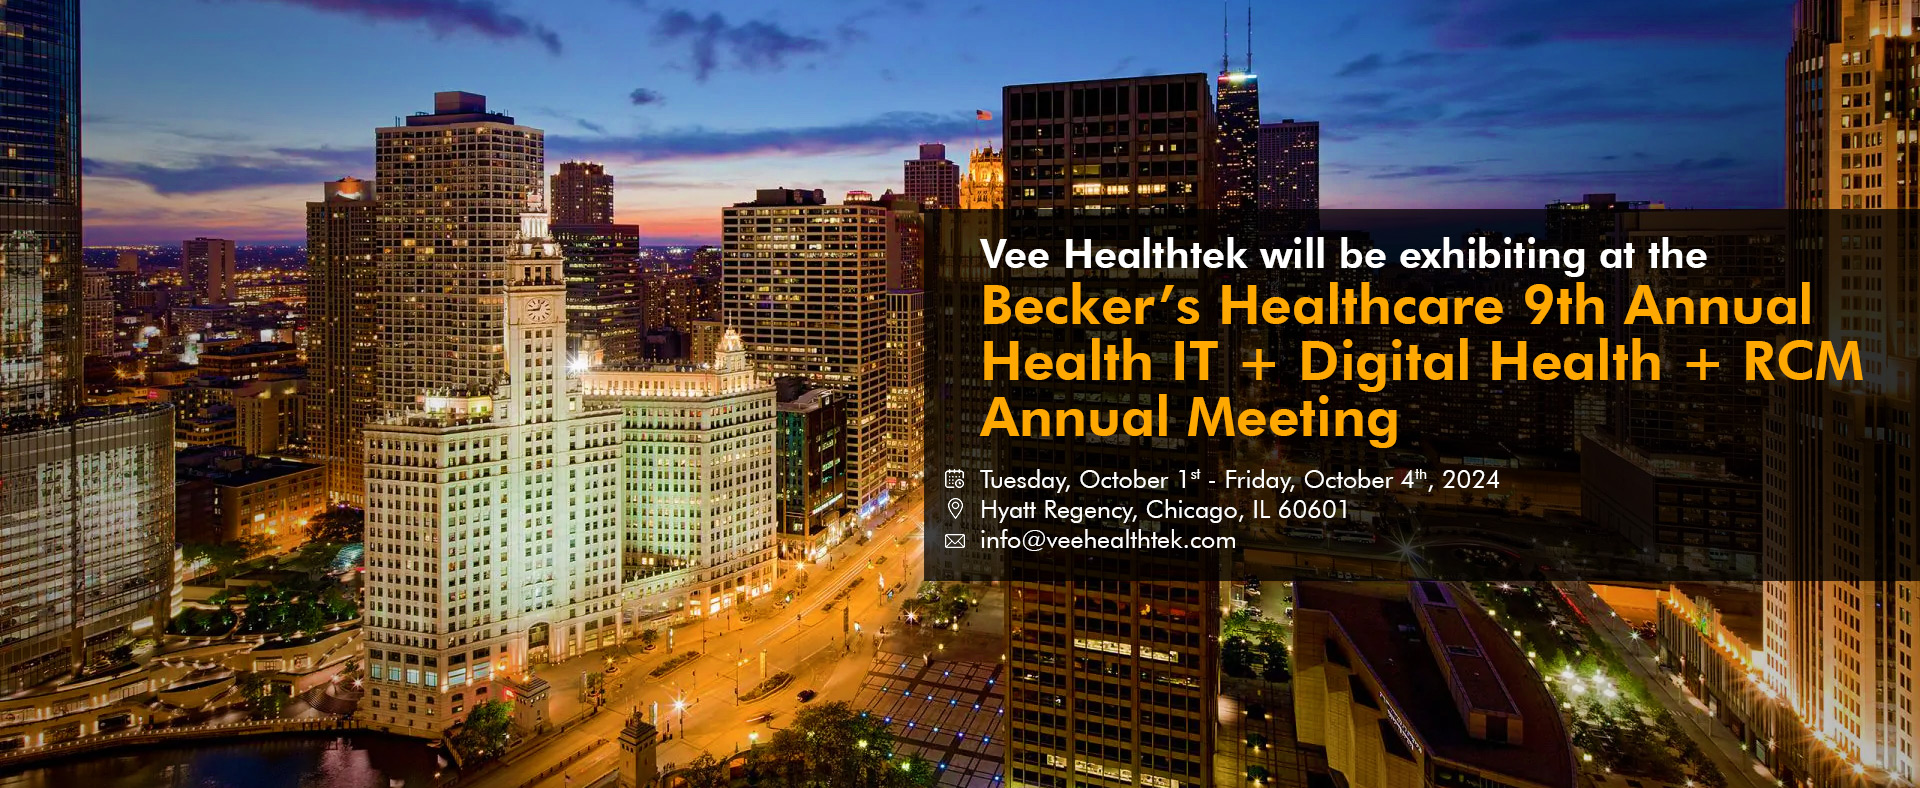 Becker’s Healthcare 9th Annual Health IT + Digital Health + RCM Annual Meeting: The Future of Business and Clinical Technologies